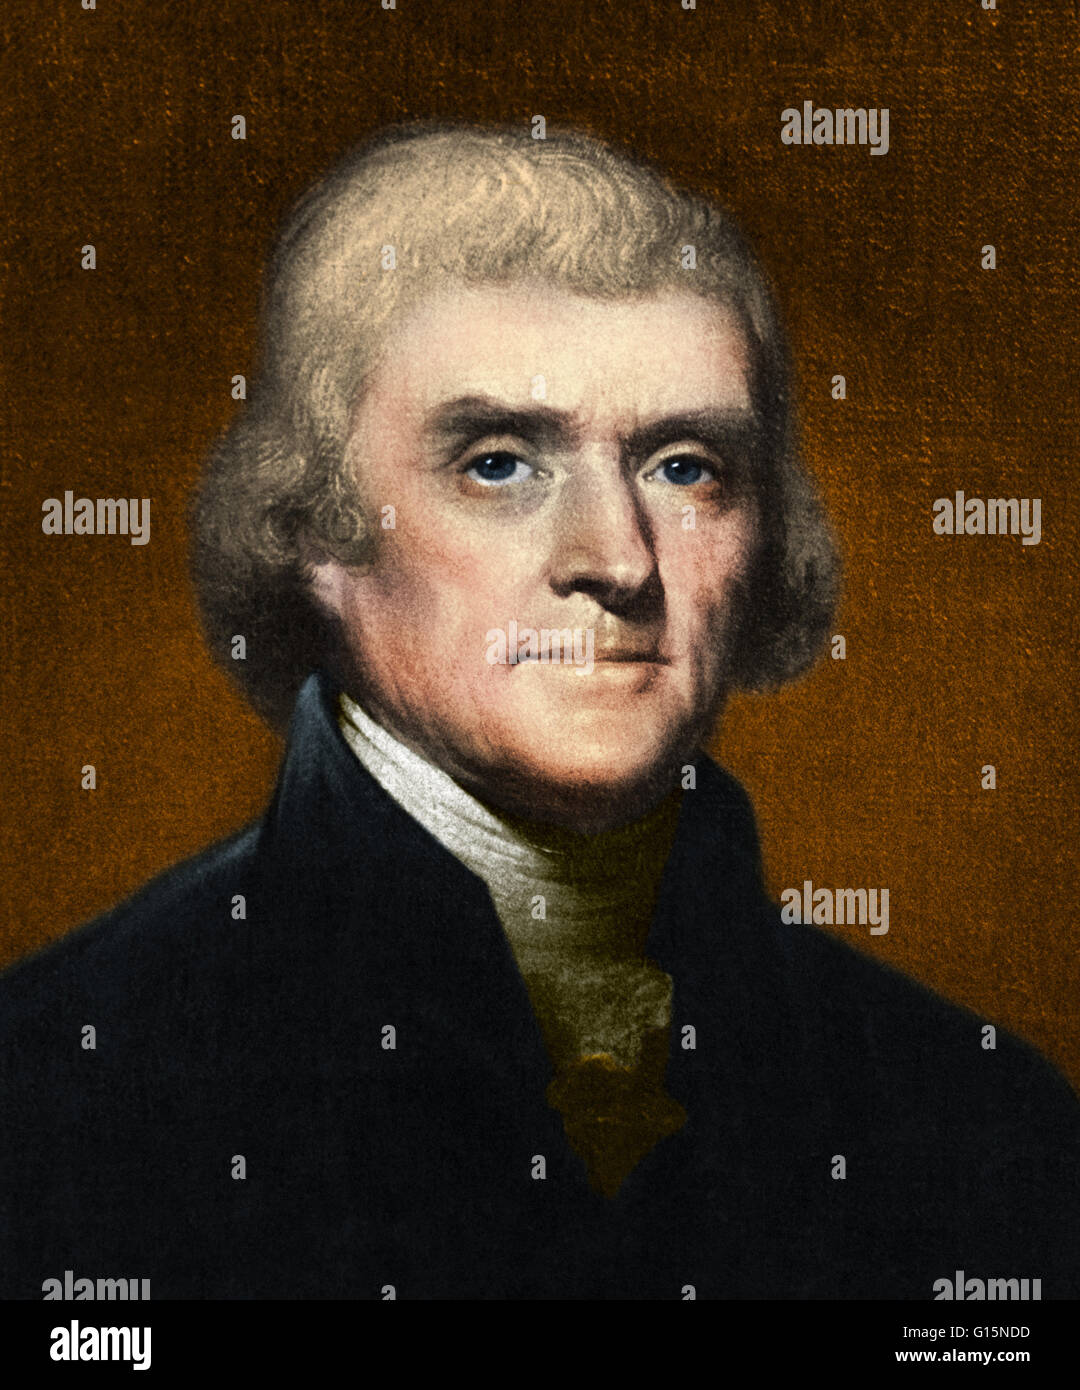 Portrait of Jefferson by artist Rembrandt Peale, believed to be from 1803. JThomas Jefferson (April 13, 1743 - July 4, 1826) was an American Founding Father, the principal author of the United States Declaration of Independence (1776) and third President Stock Photo